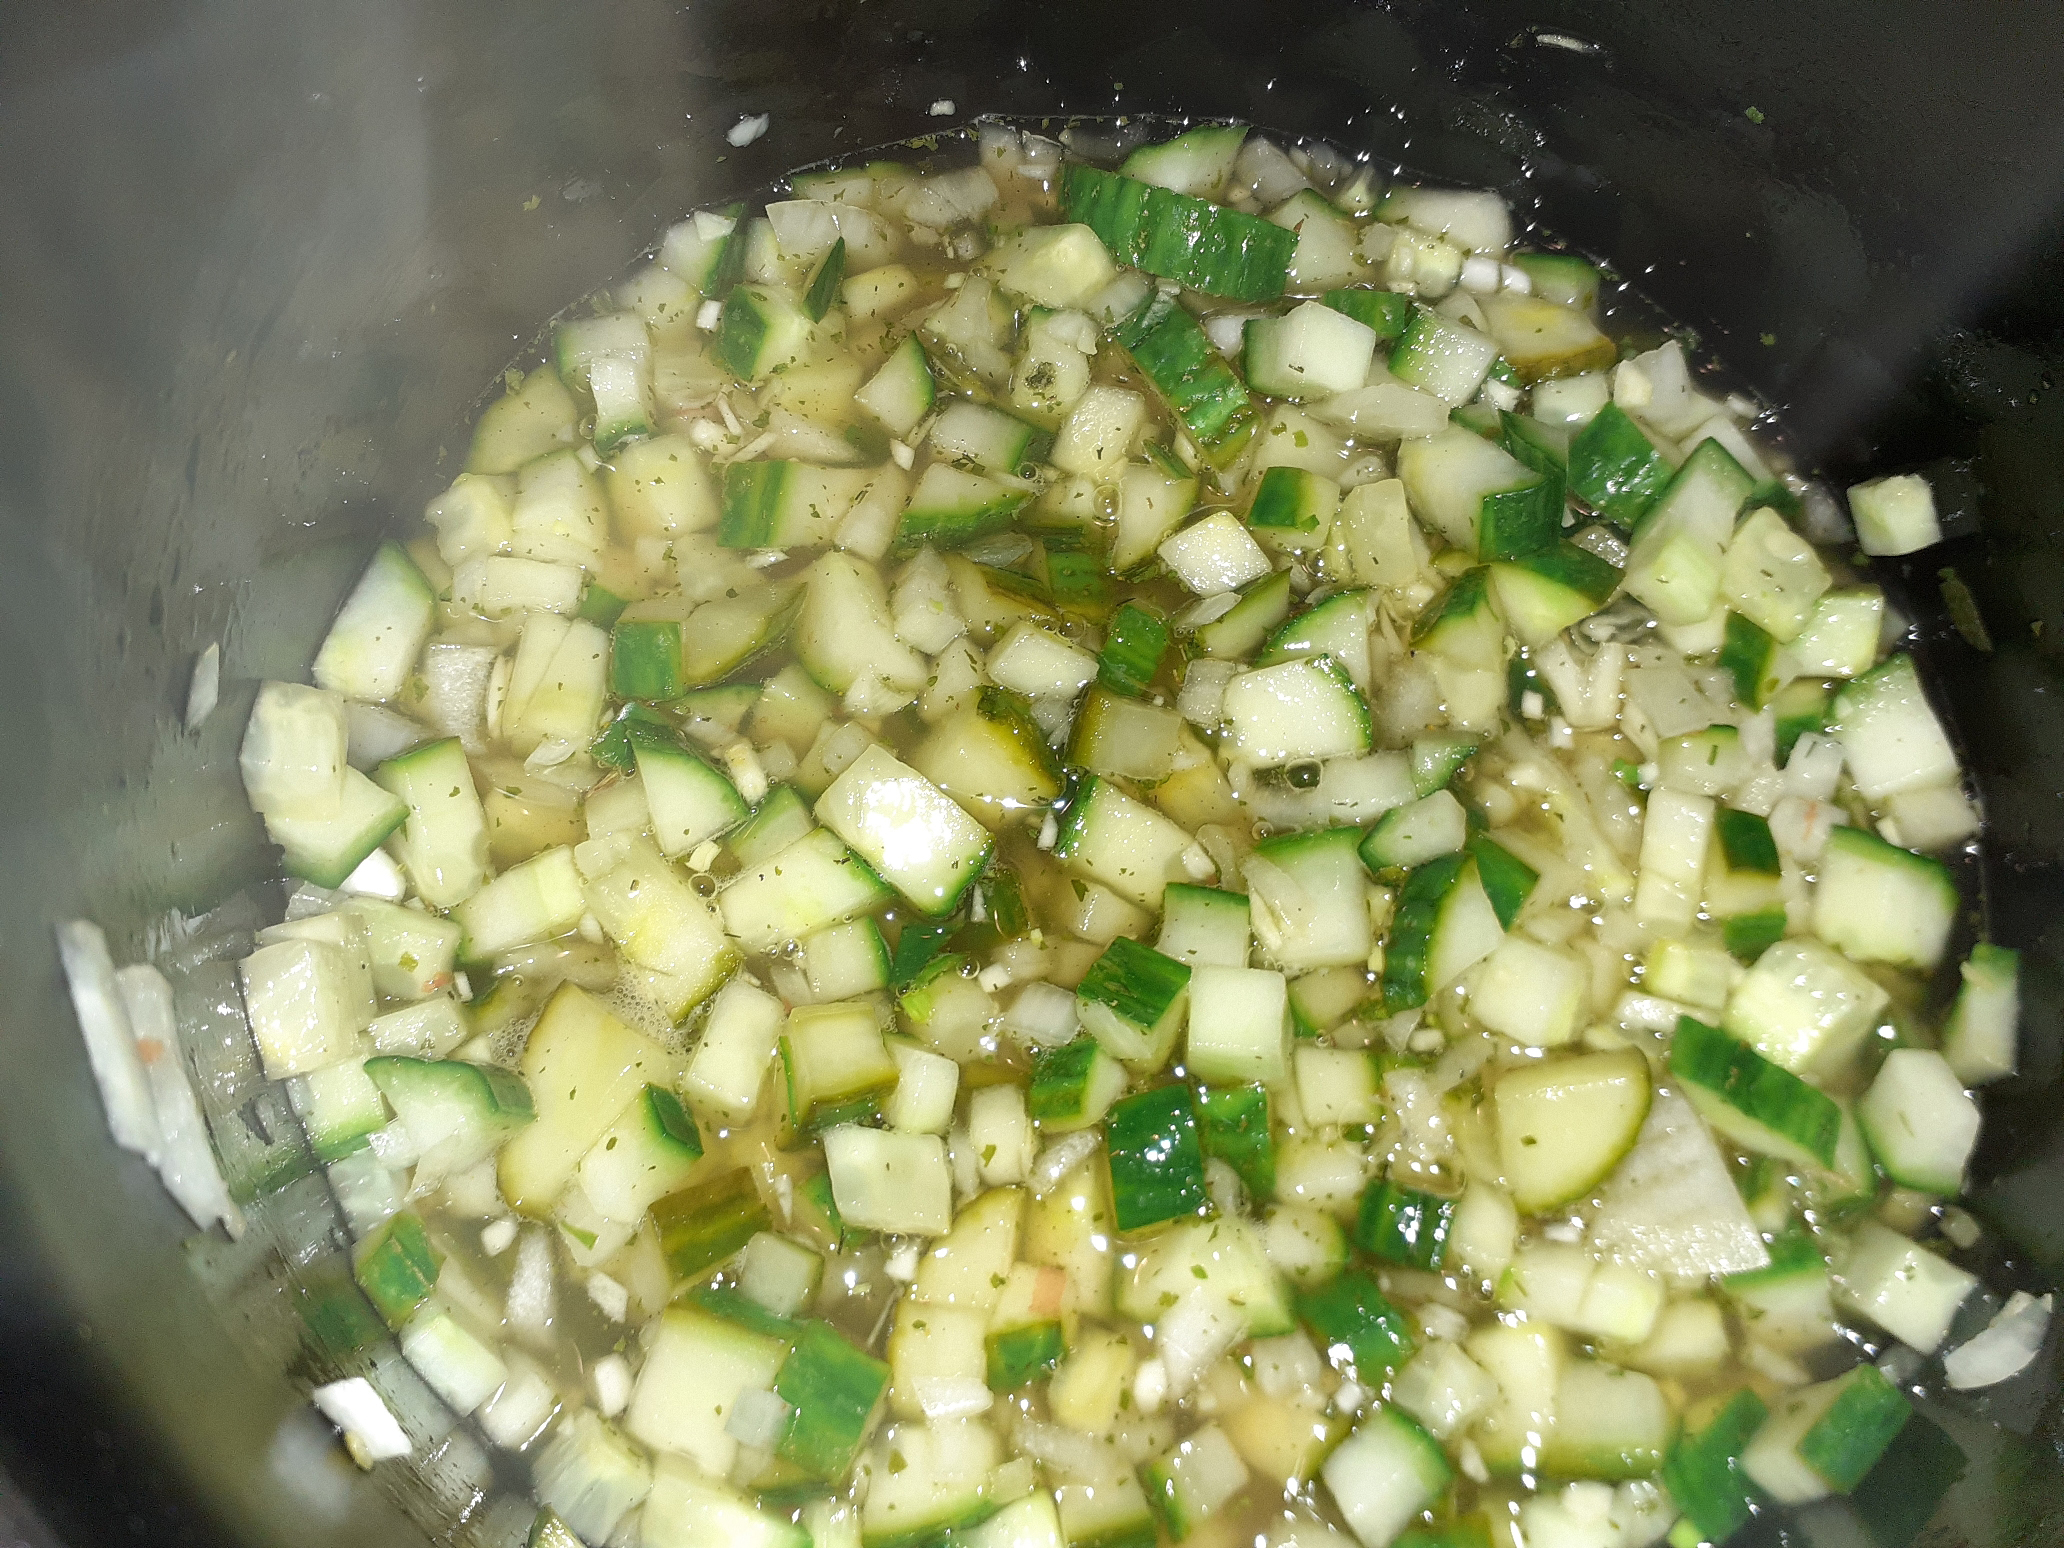 Put the cucumbers, onions, garlic and the rest of the ingredients in a pot.